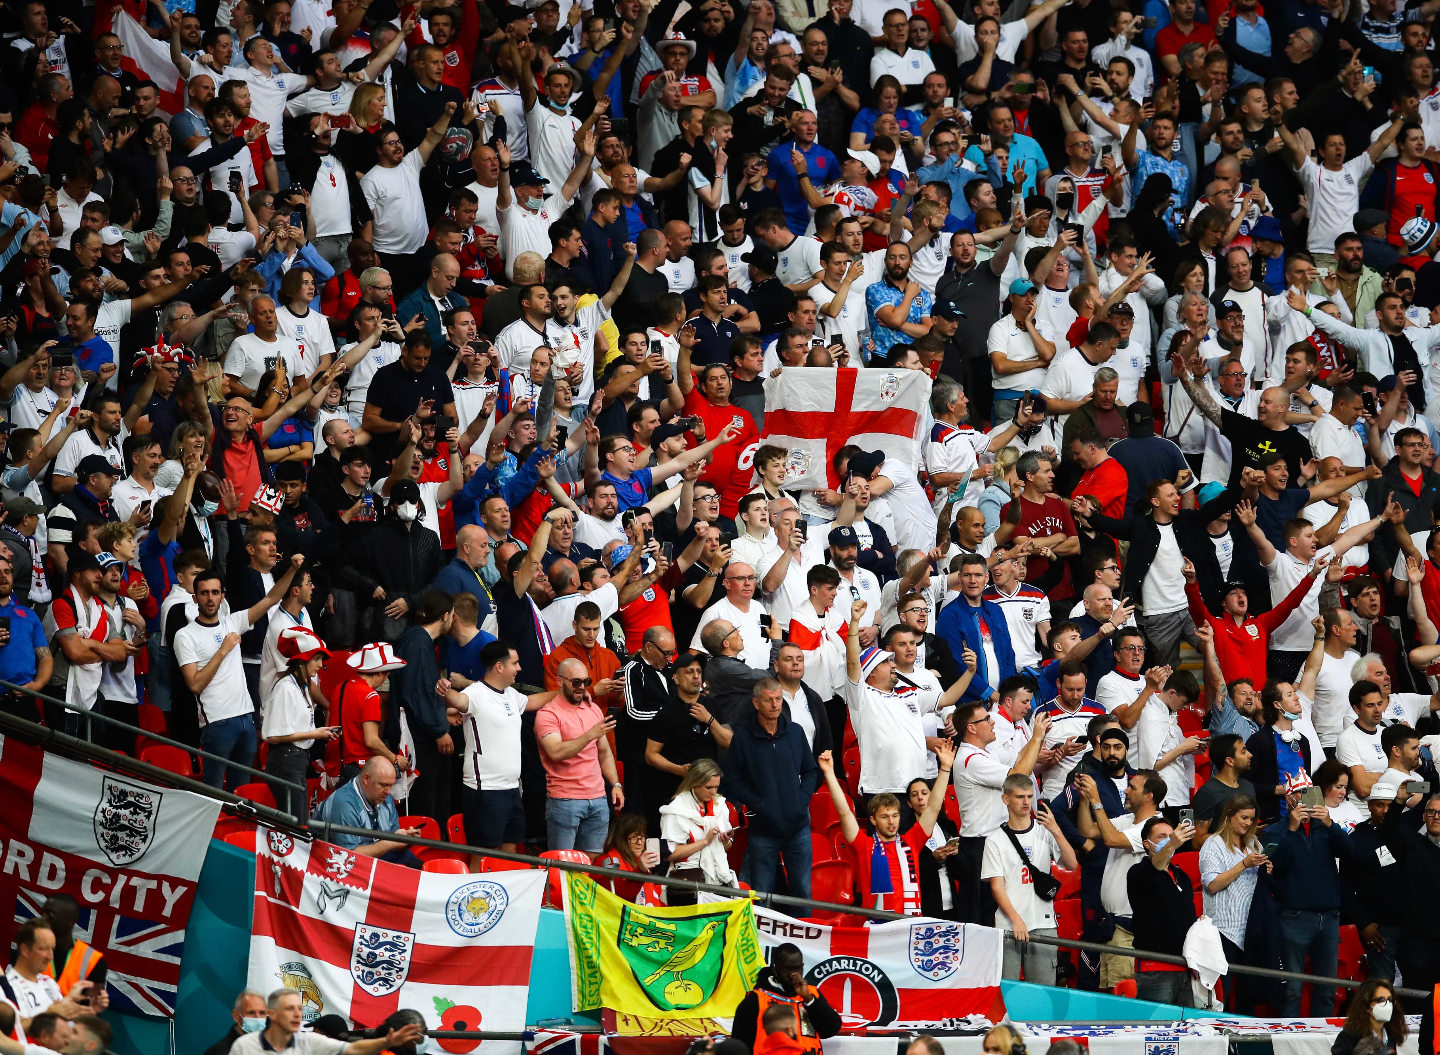 Deaths in the stands if England win?